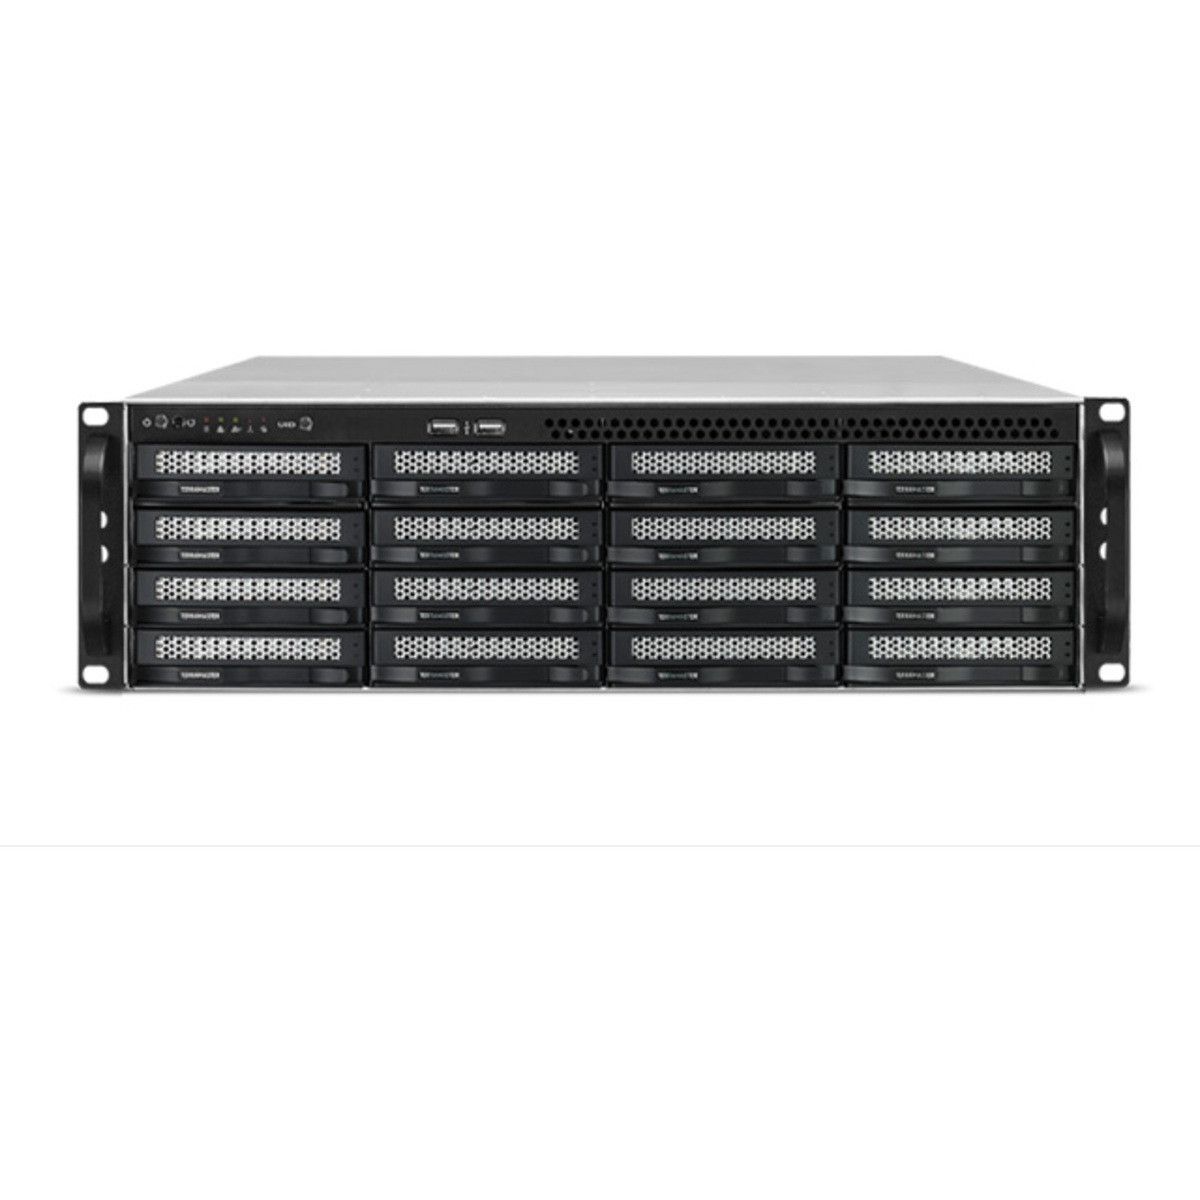 TerraMaster U16-722-2224 64tb 16-Bay RackMount Large Business / Enterprise NAS - Network Attached Storage Device 16x4tb Crucial MX500 CT4000MX500SSD1 2.5 560/510MB/s SATA 6Gb/s SSD CONSUMER Class Drives Installed - Burn-In Tested U16-722-2224